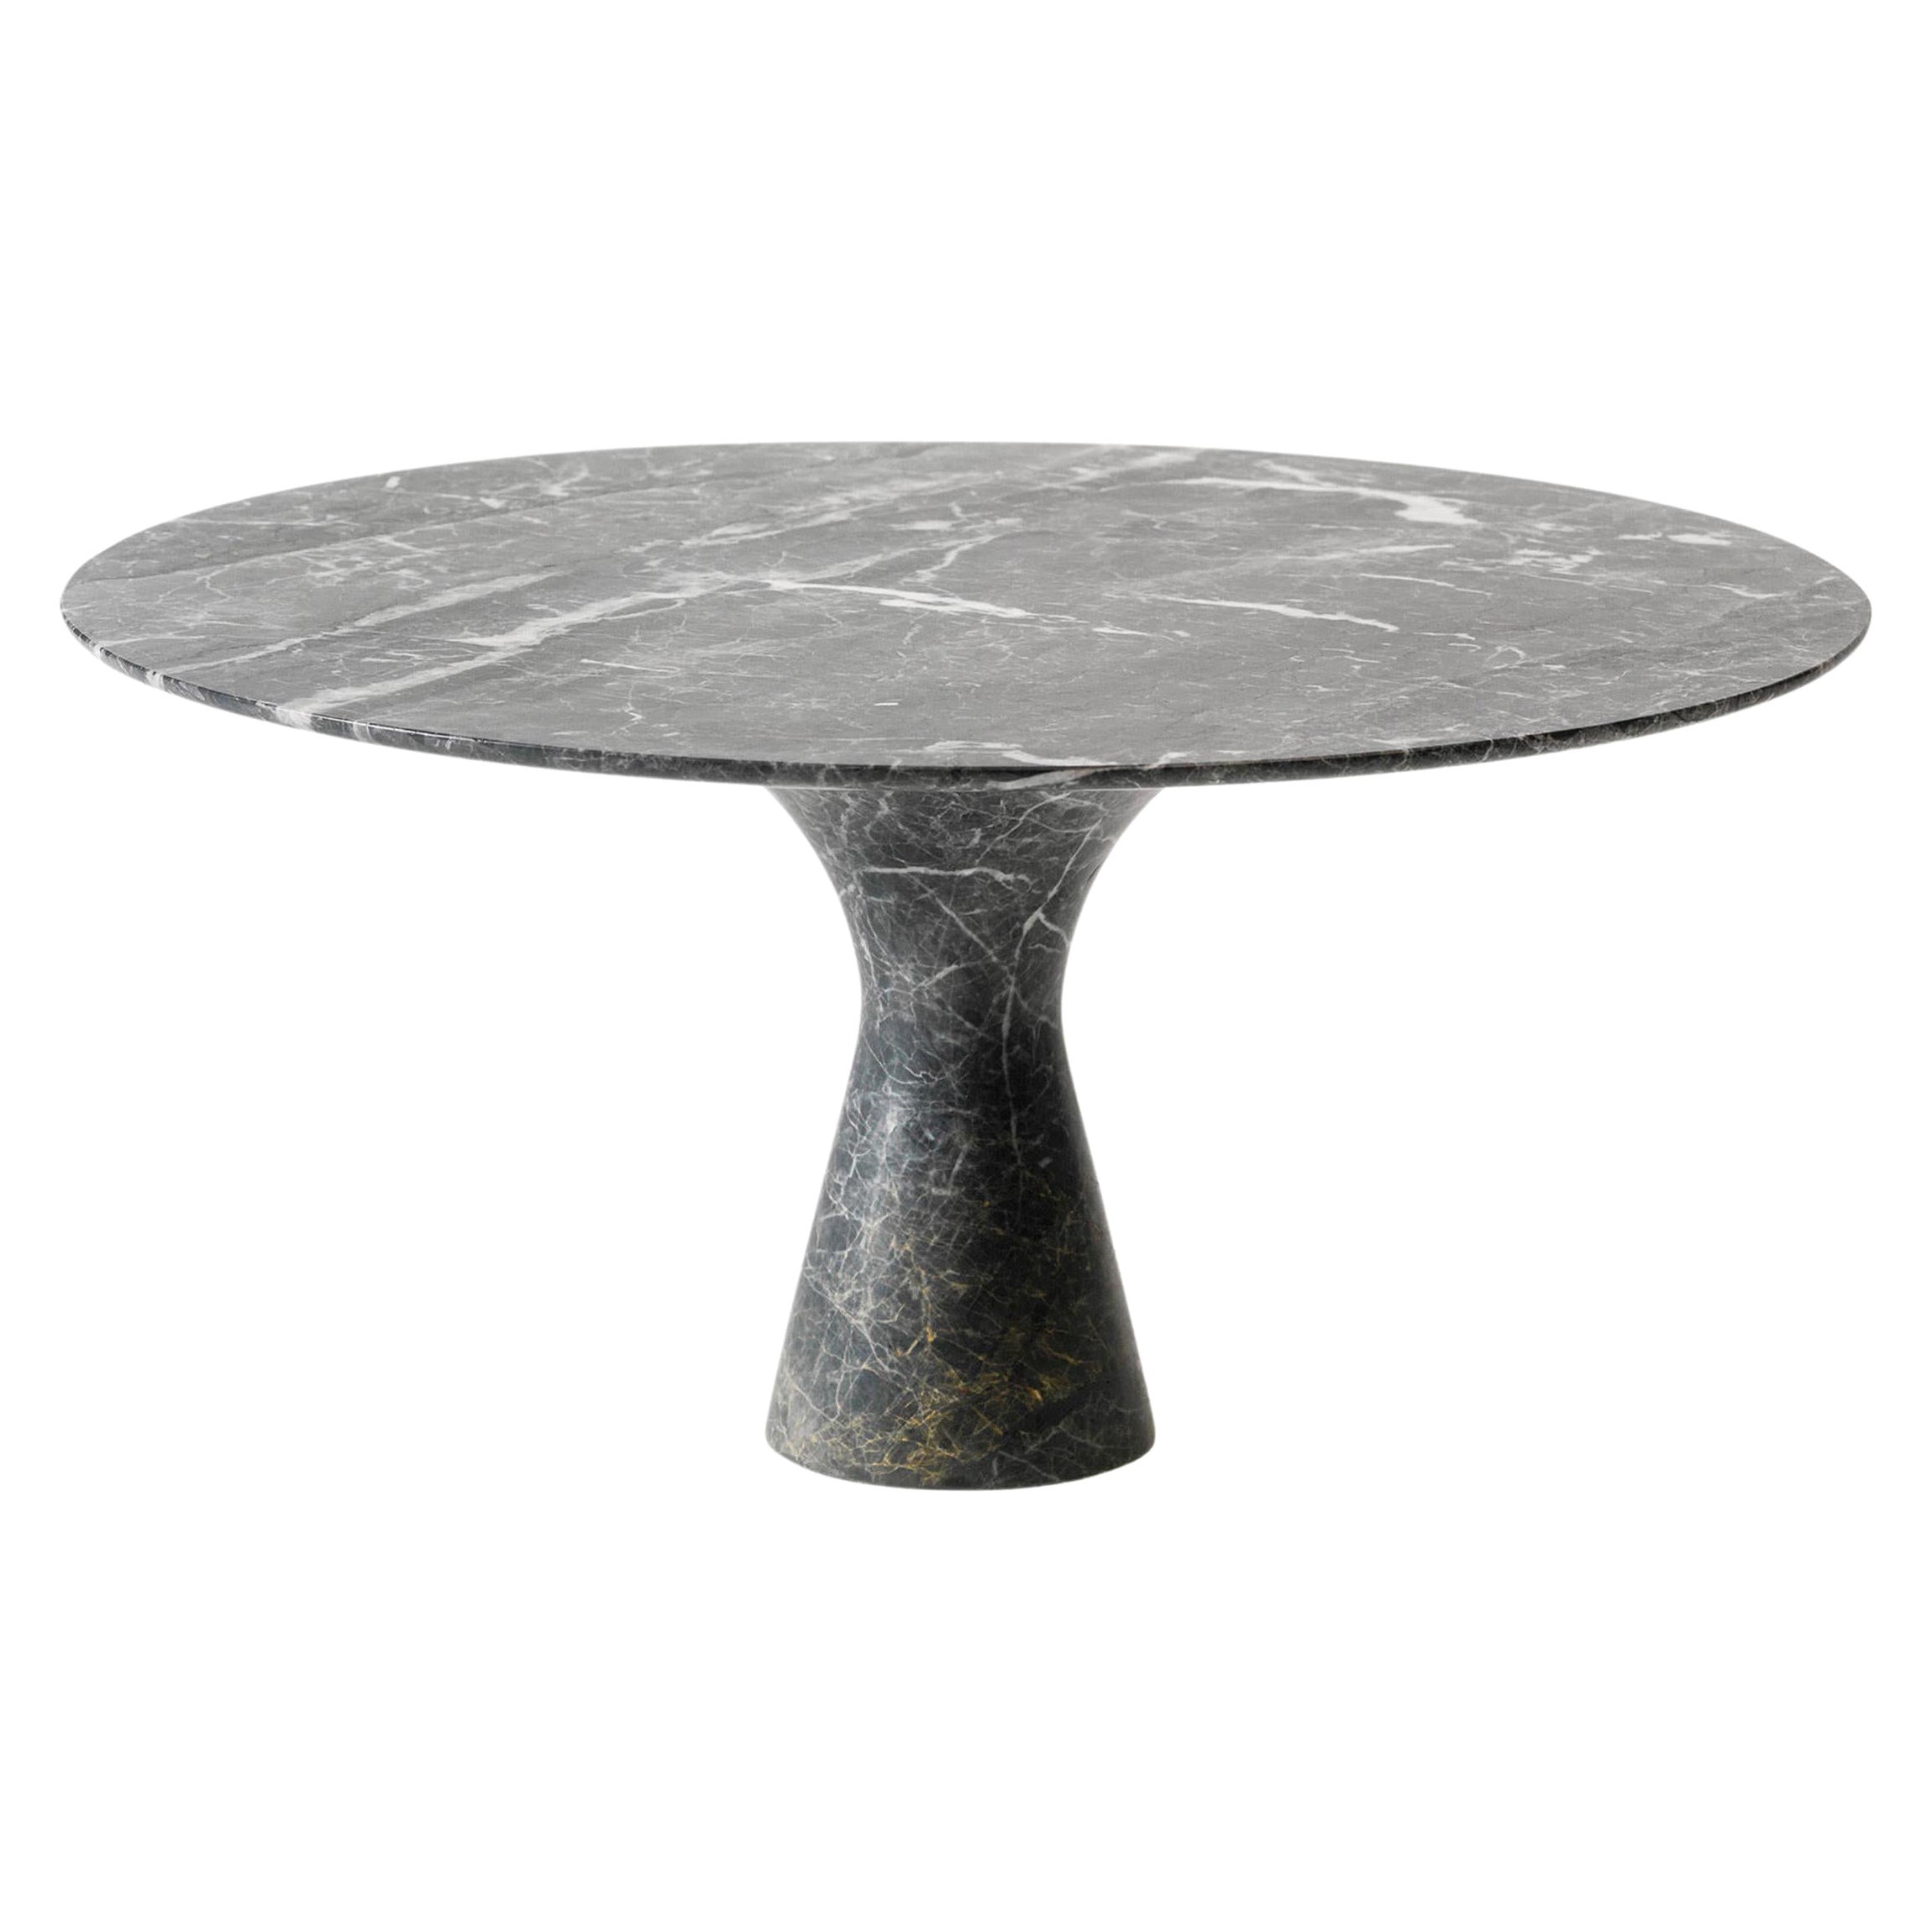 Grey Saint Laurent Refined Contemporary Marble Dining Table 180/75 For Sale